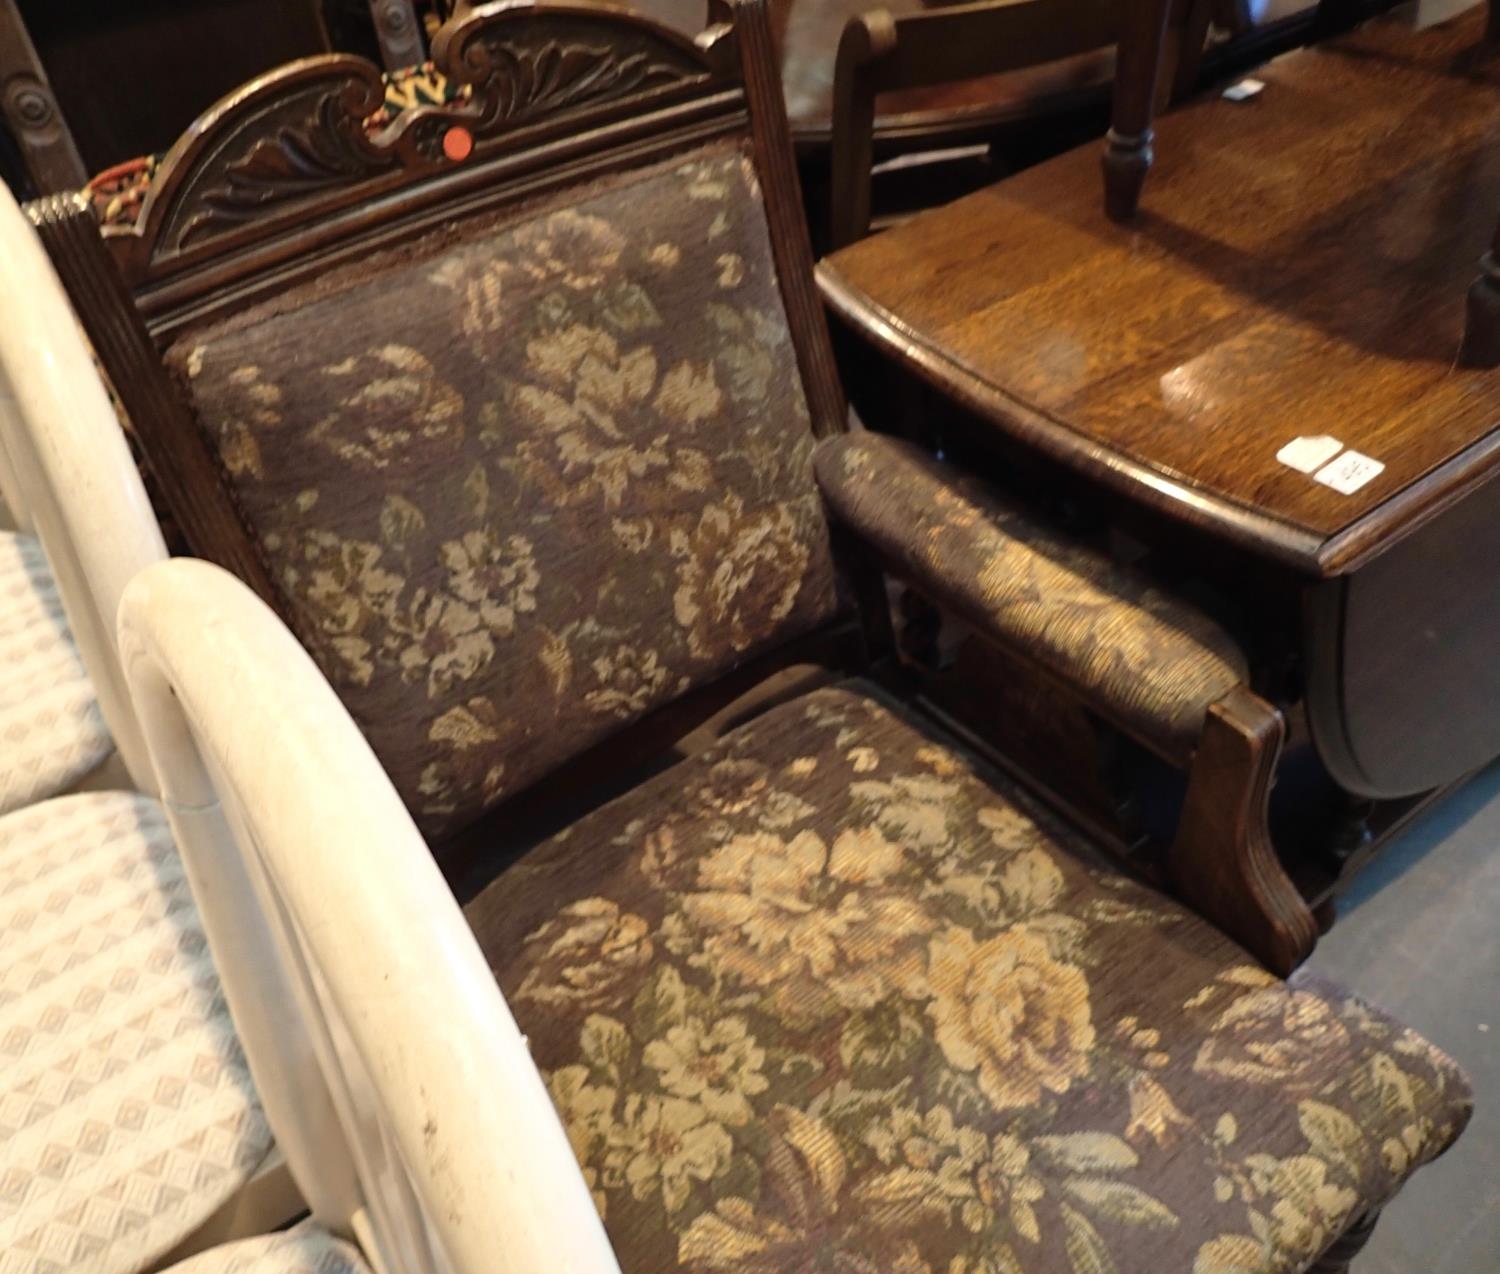 Upholstered chair with cushioned arm rests. Not available for in-house P&P, contact Paul O'Hea at